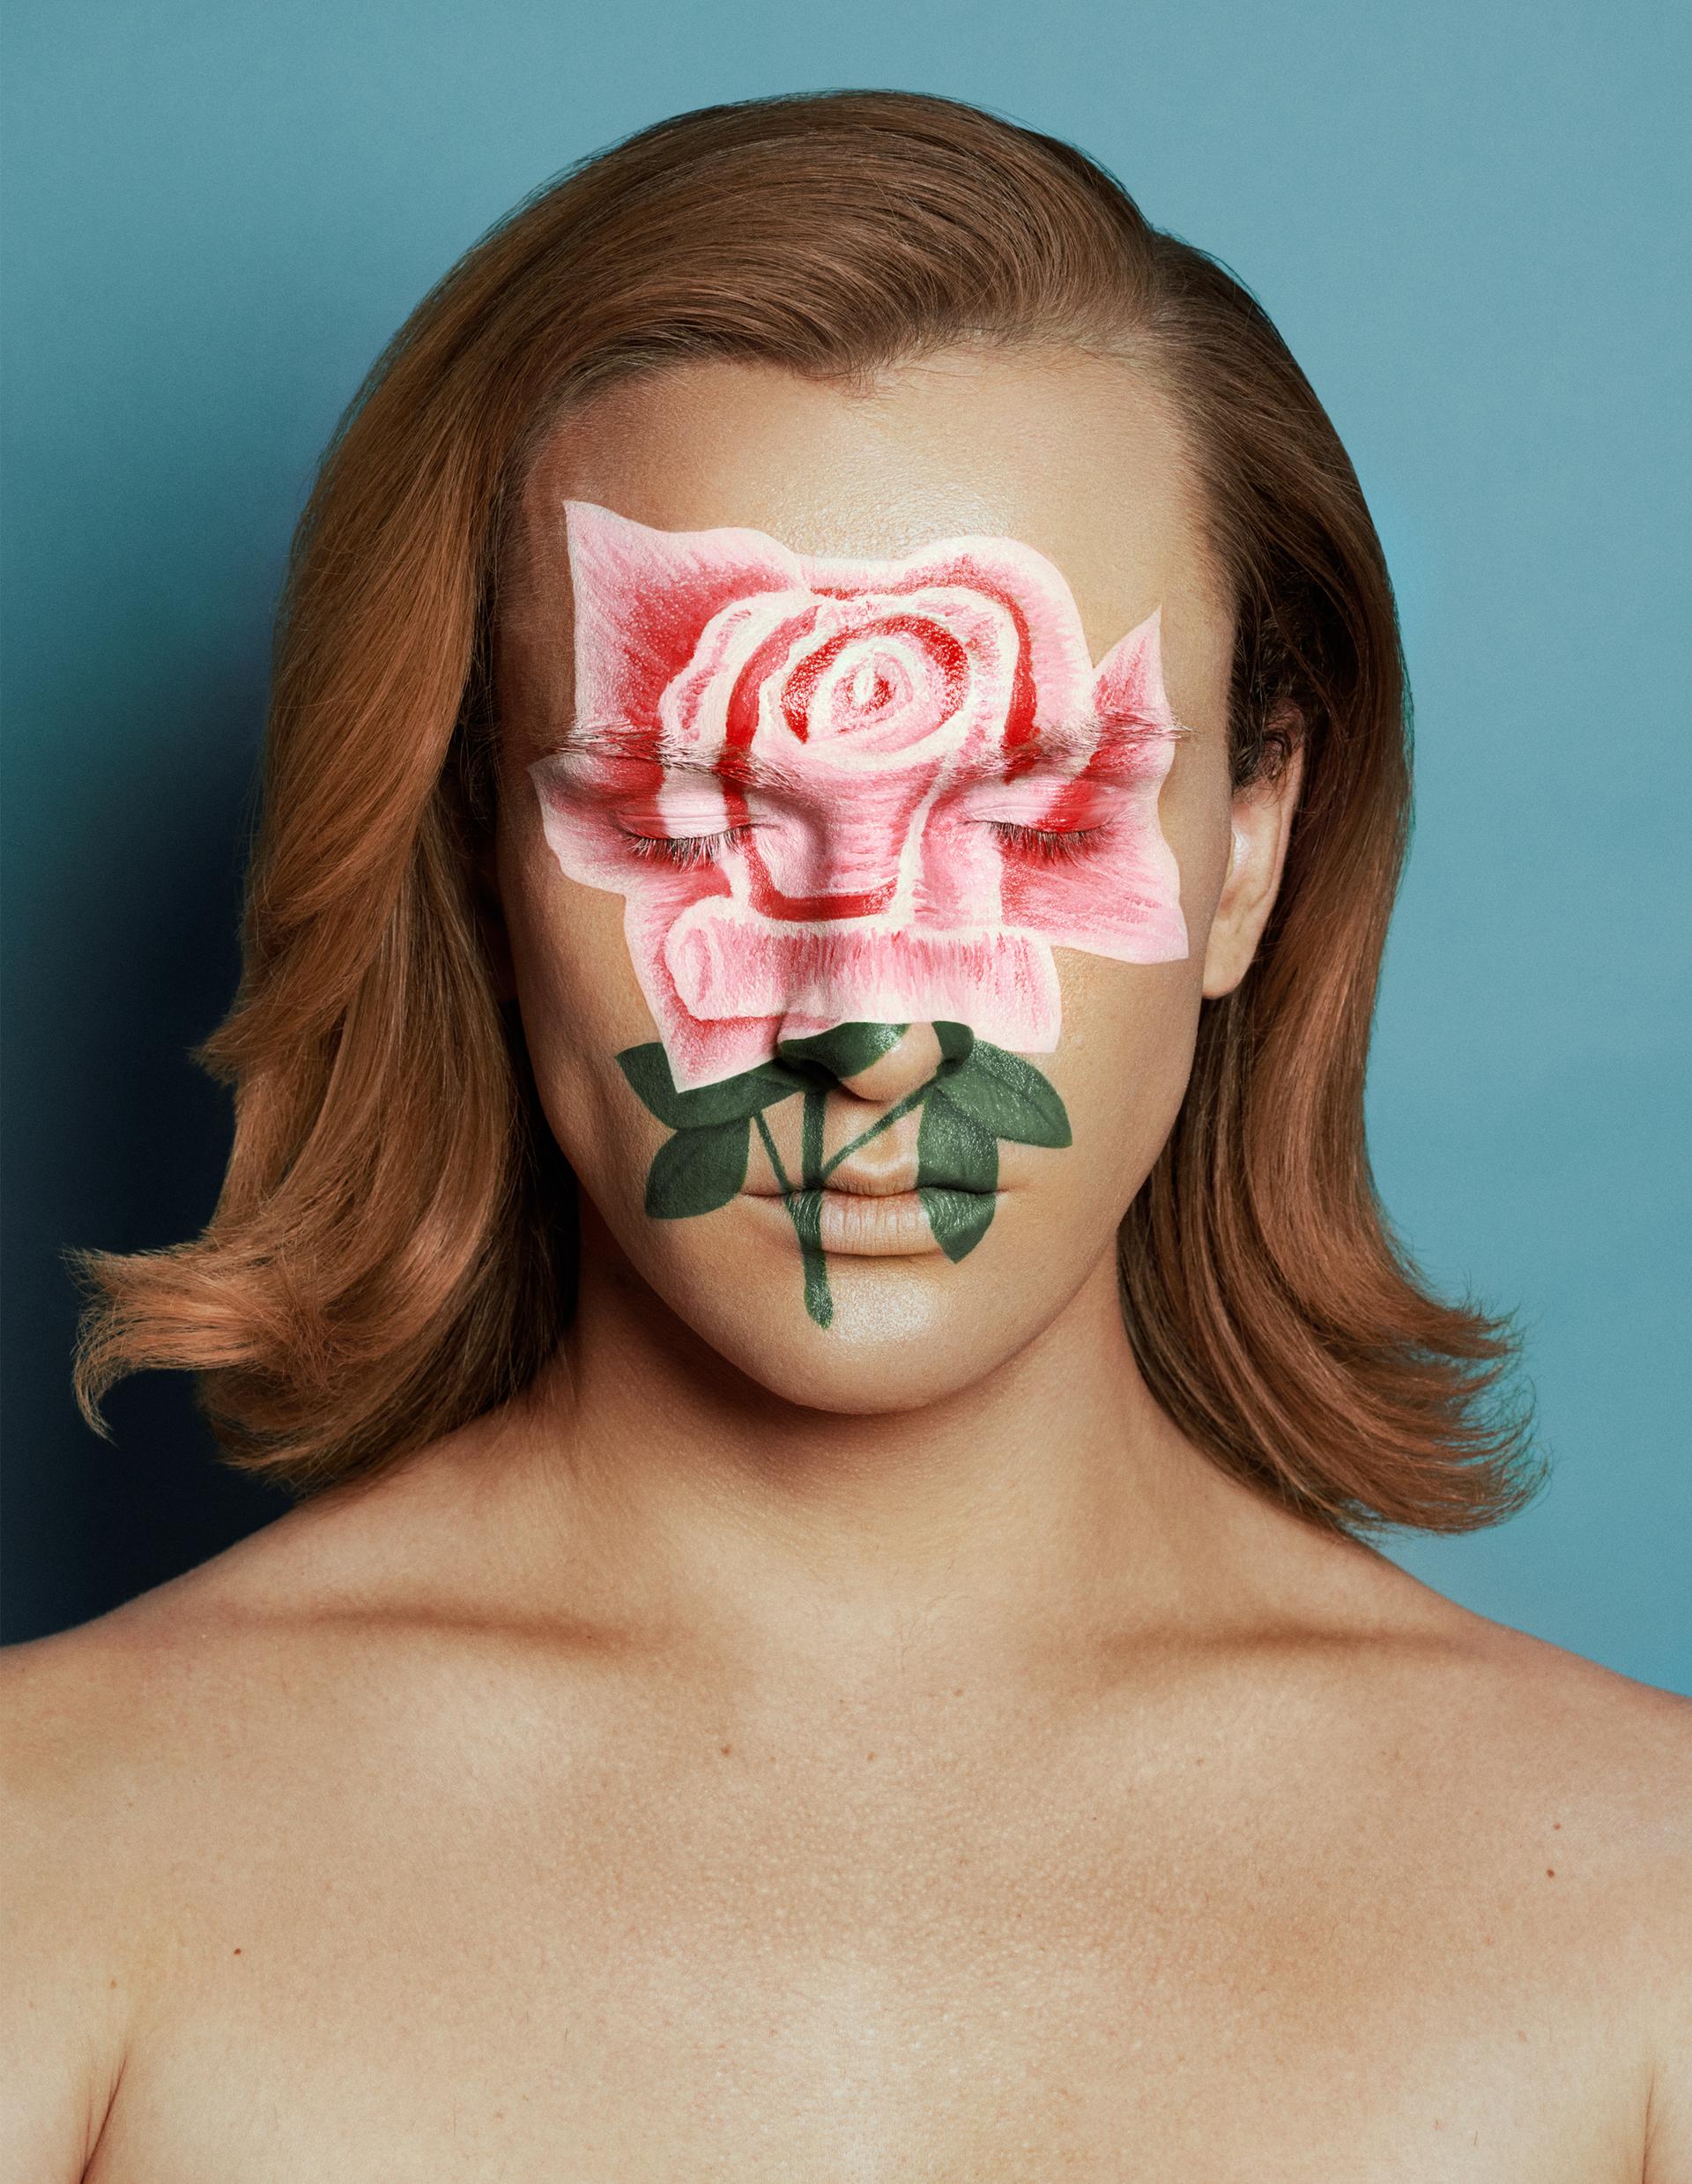 Trans Person's Face covered by a Rose by Laurel Charleston